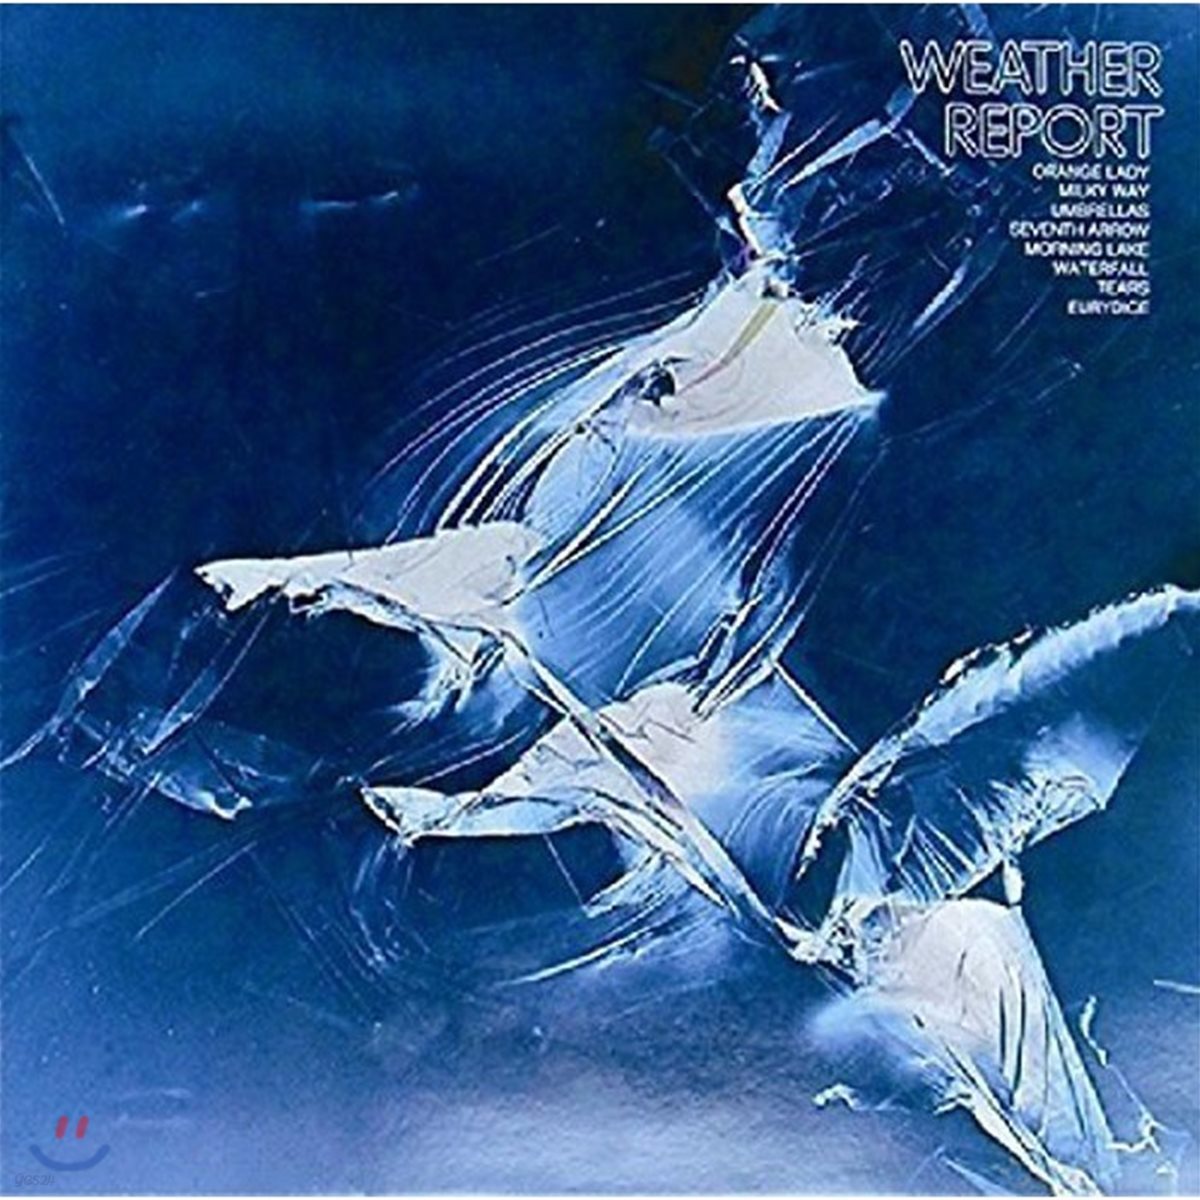 Weather Report - Weather Report 웨더 리포트 데뷔 앨범